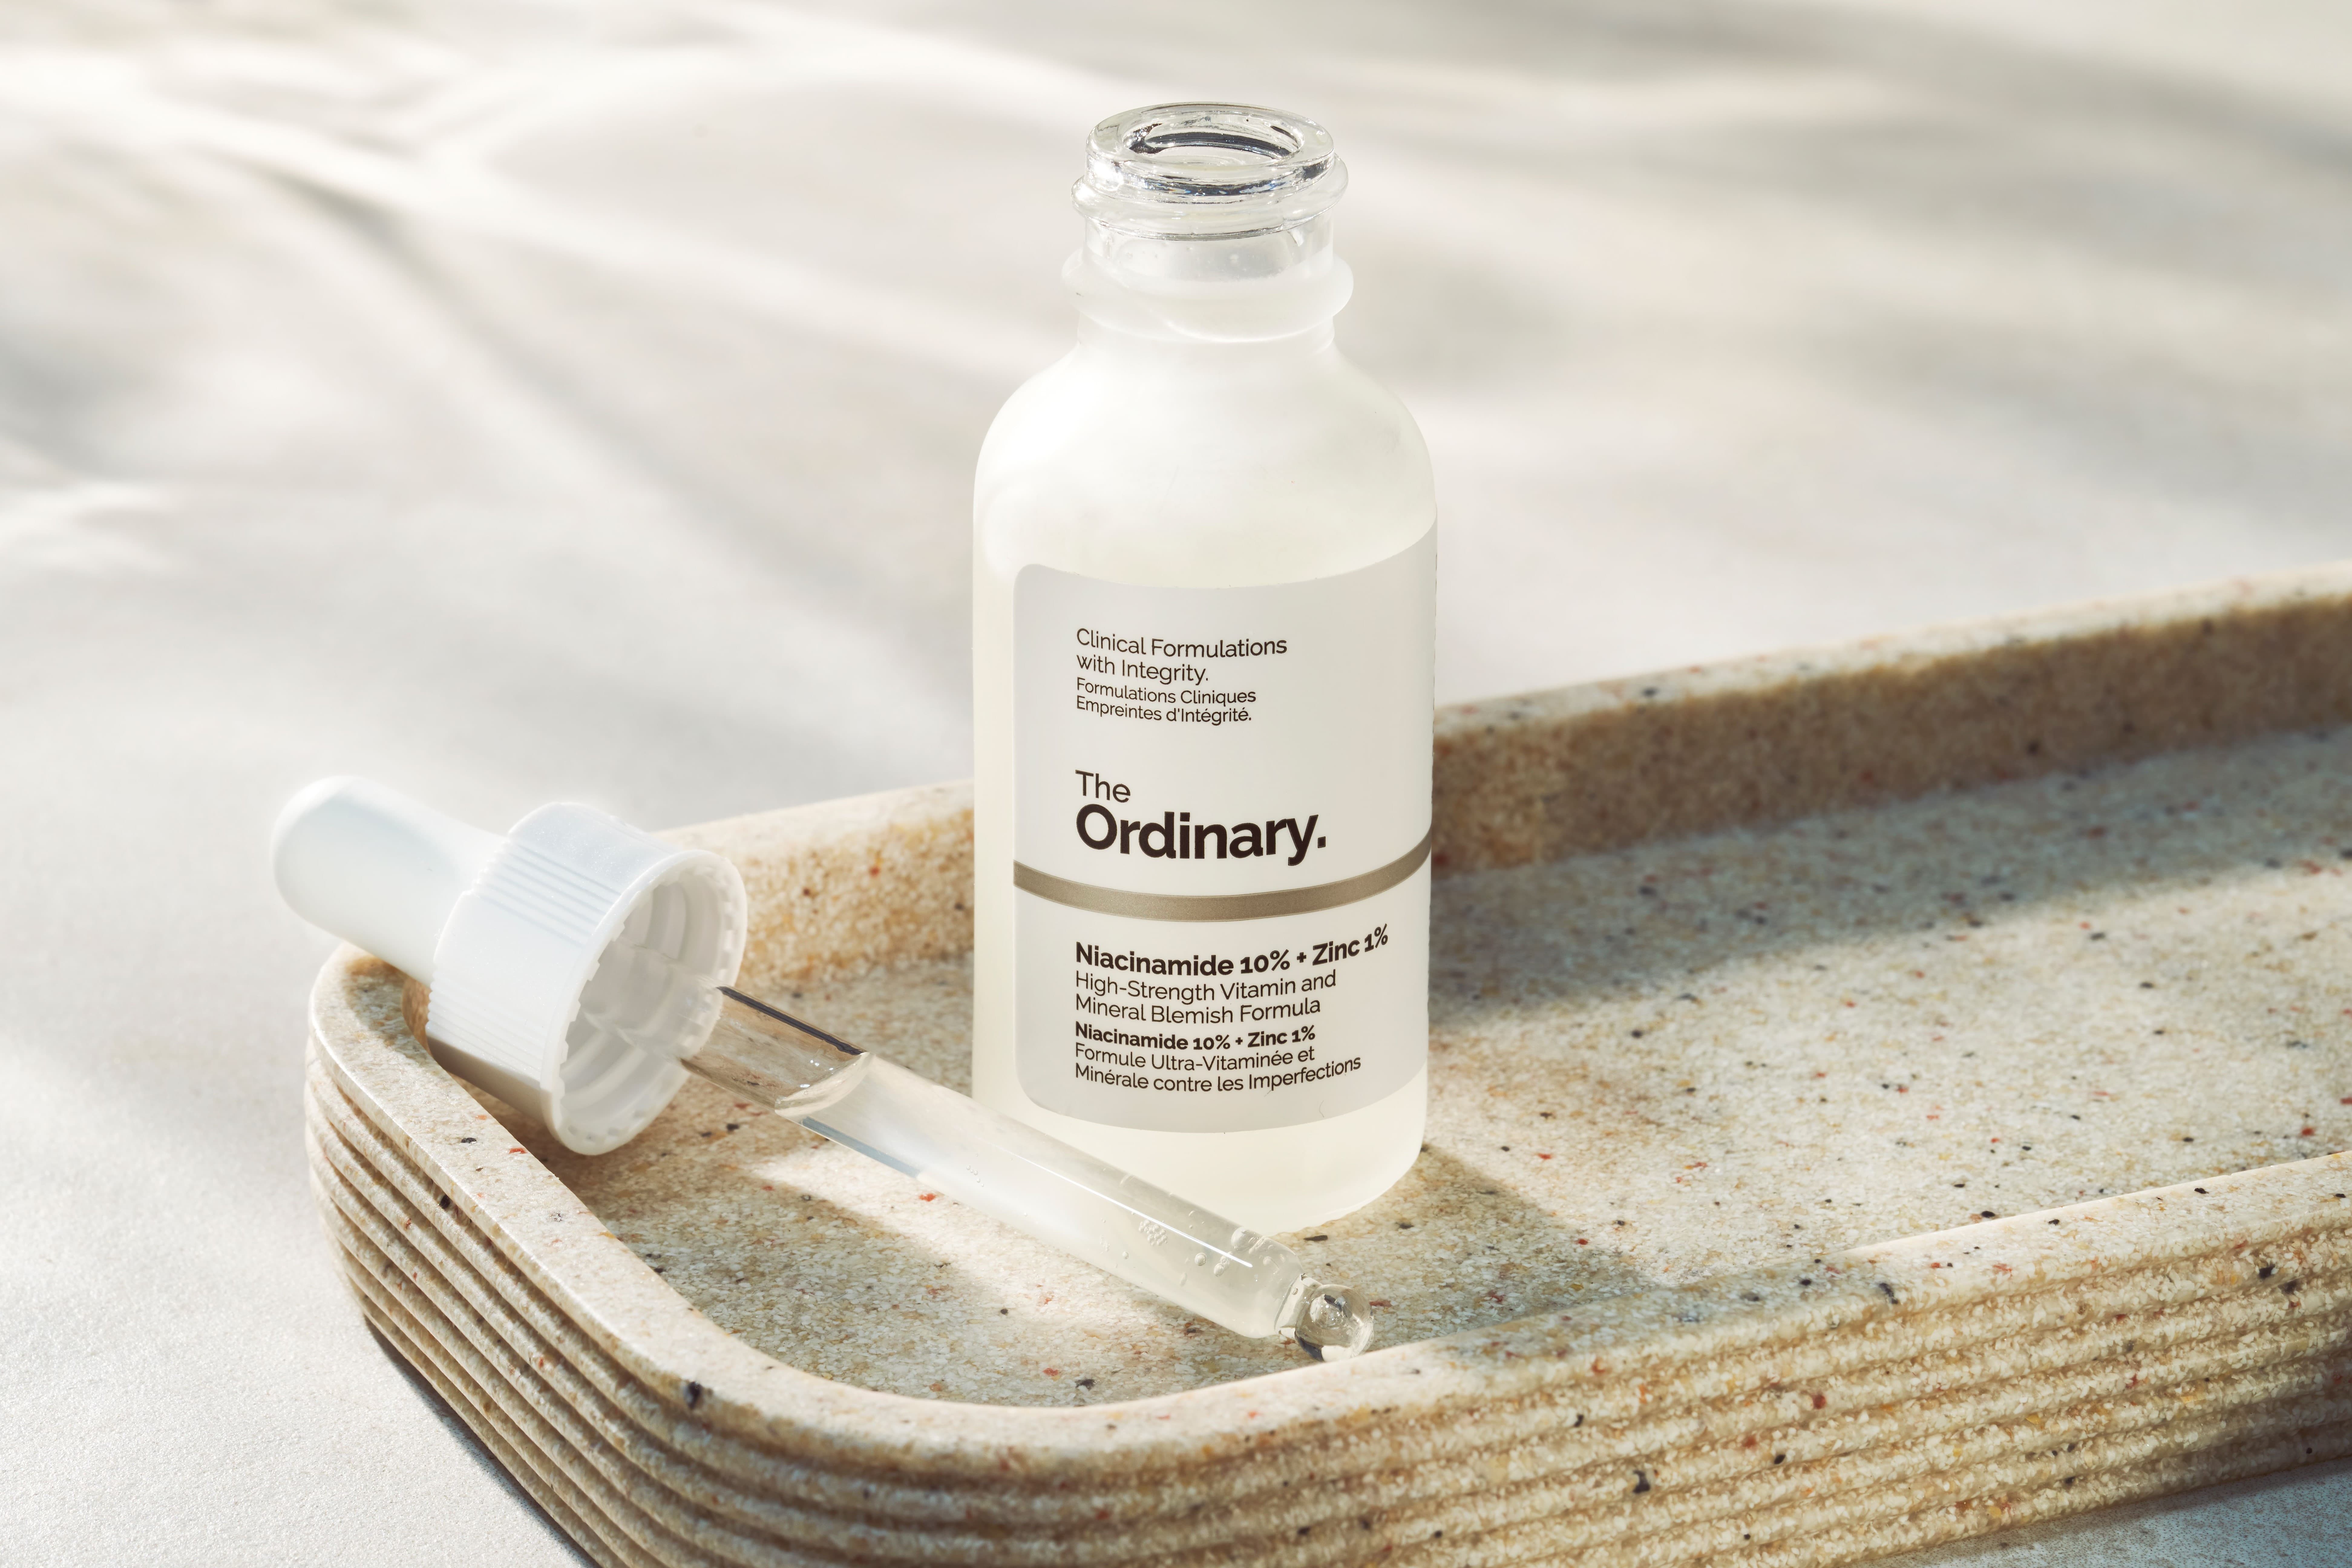 The Ordinary: Empowering Consumers Through Skincare Science